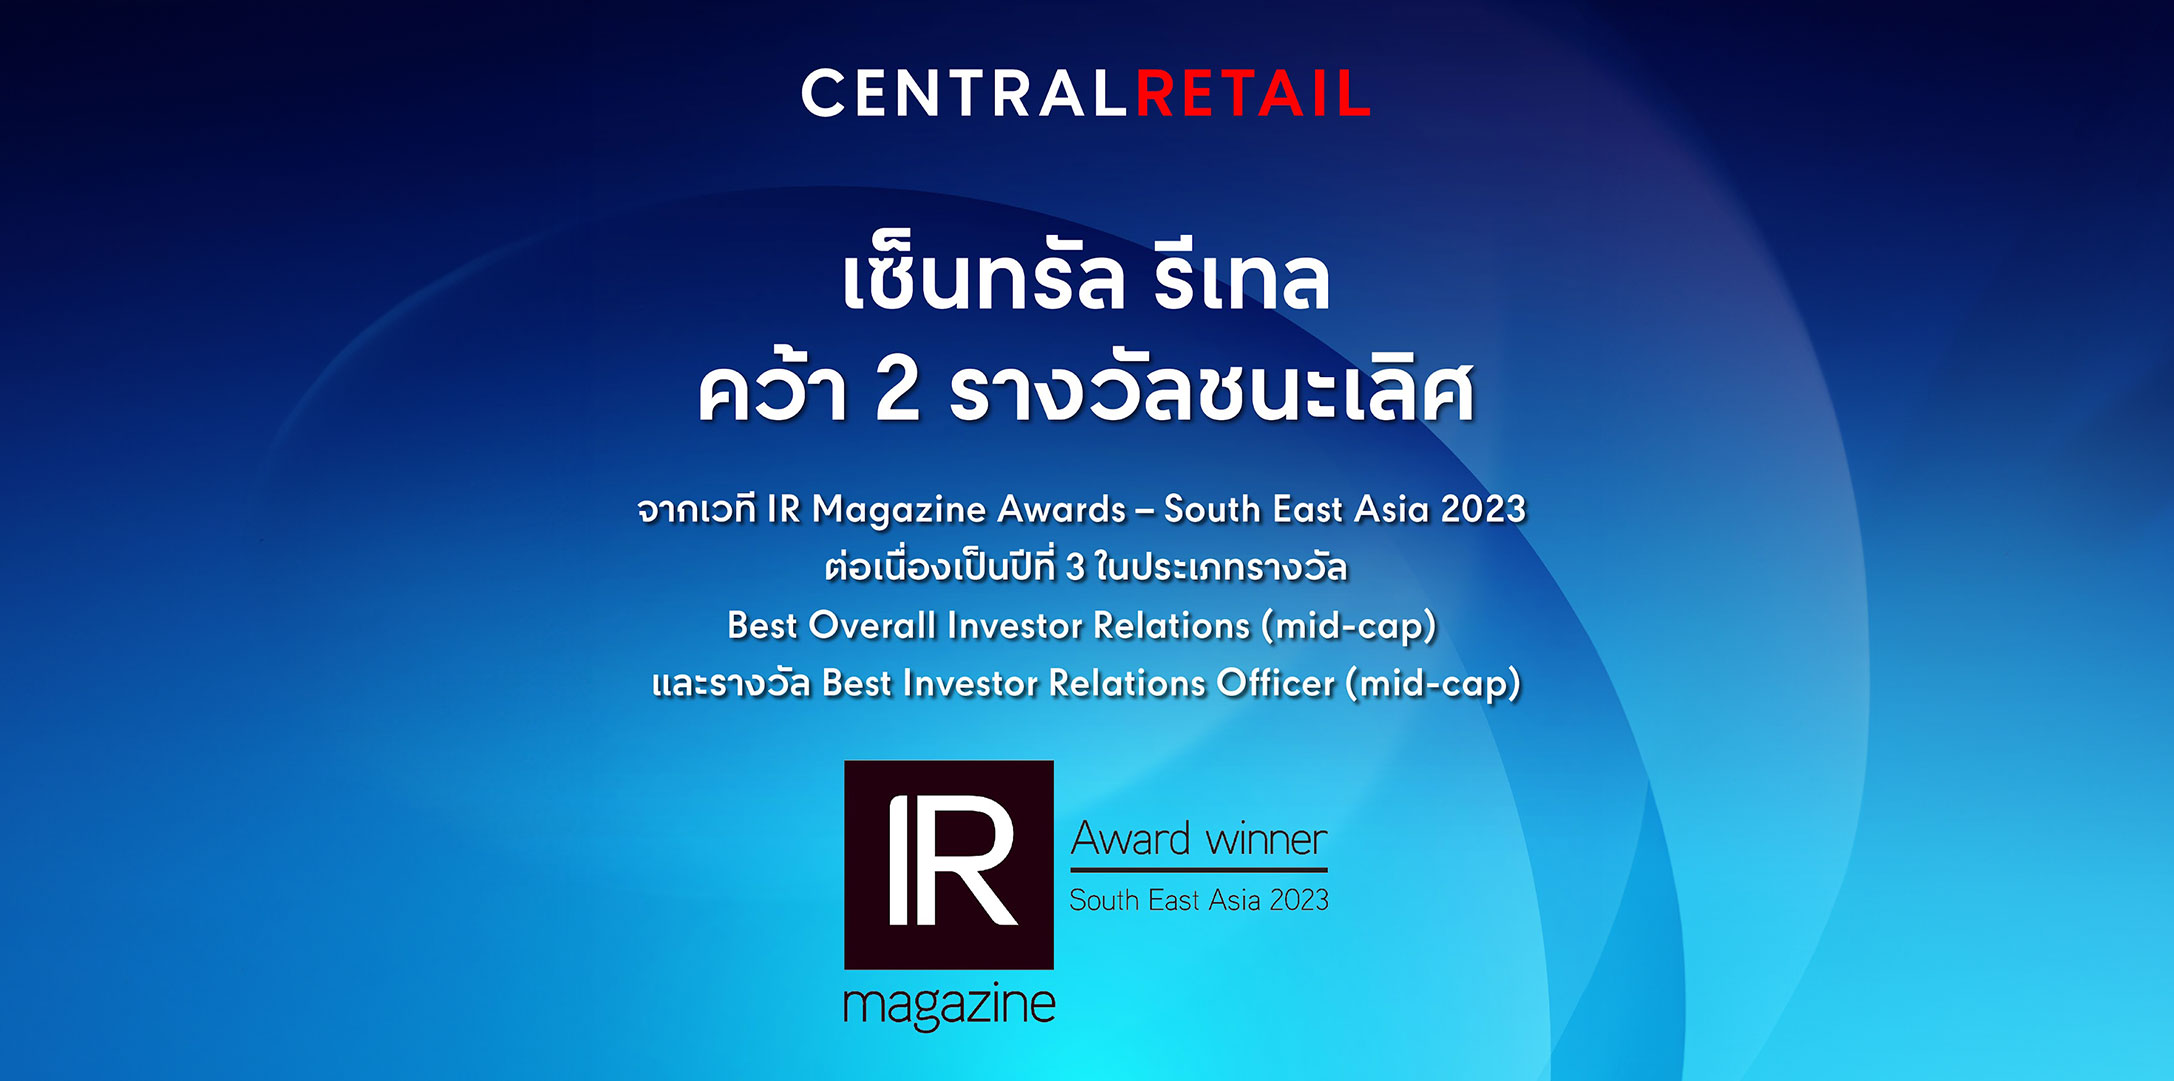 Best Overall Investor Relations (mid-cap) และรางวัล Best Investor Relations Officer (mid-cap)